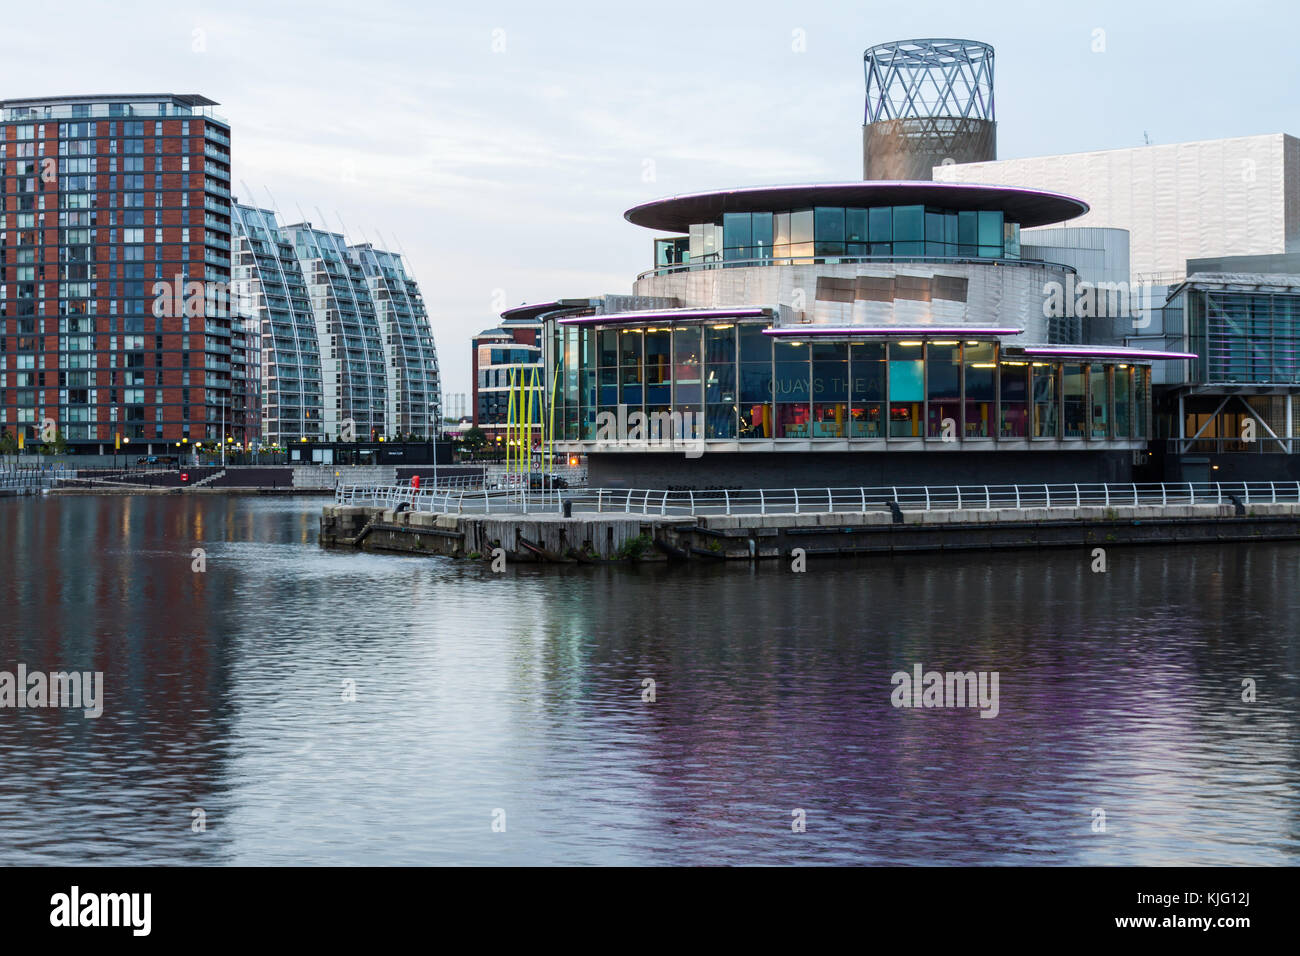 Image of the Lowry Theatres and Lowry Art Gallery taken from the Manchester Ship Canal at Salford Quays in the early evening. Stock Photo